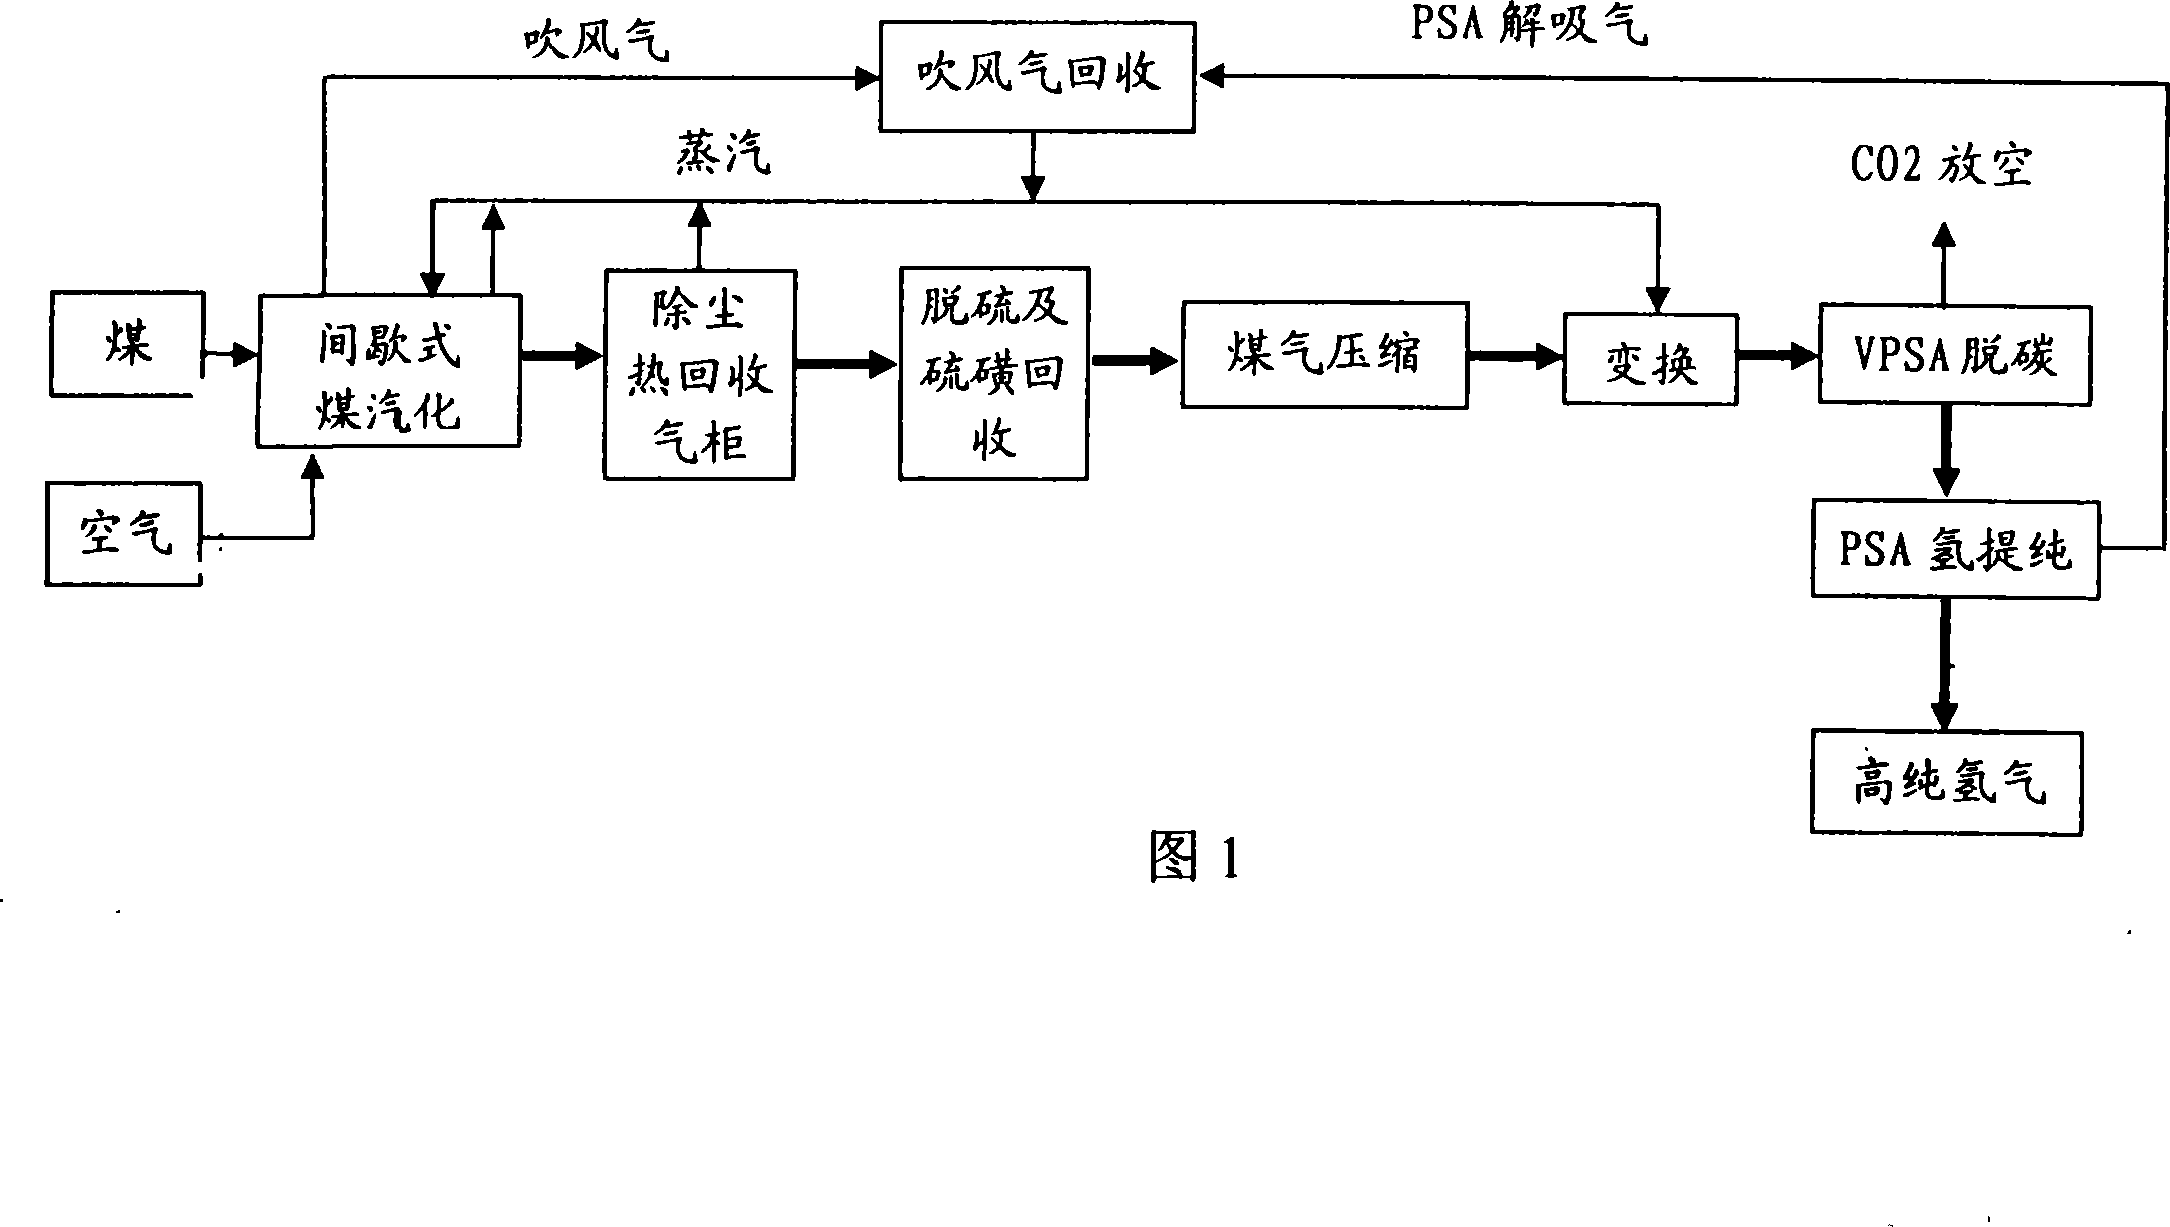 Small-sized coal gasification hydrogen making method